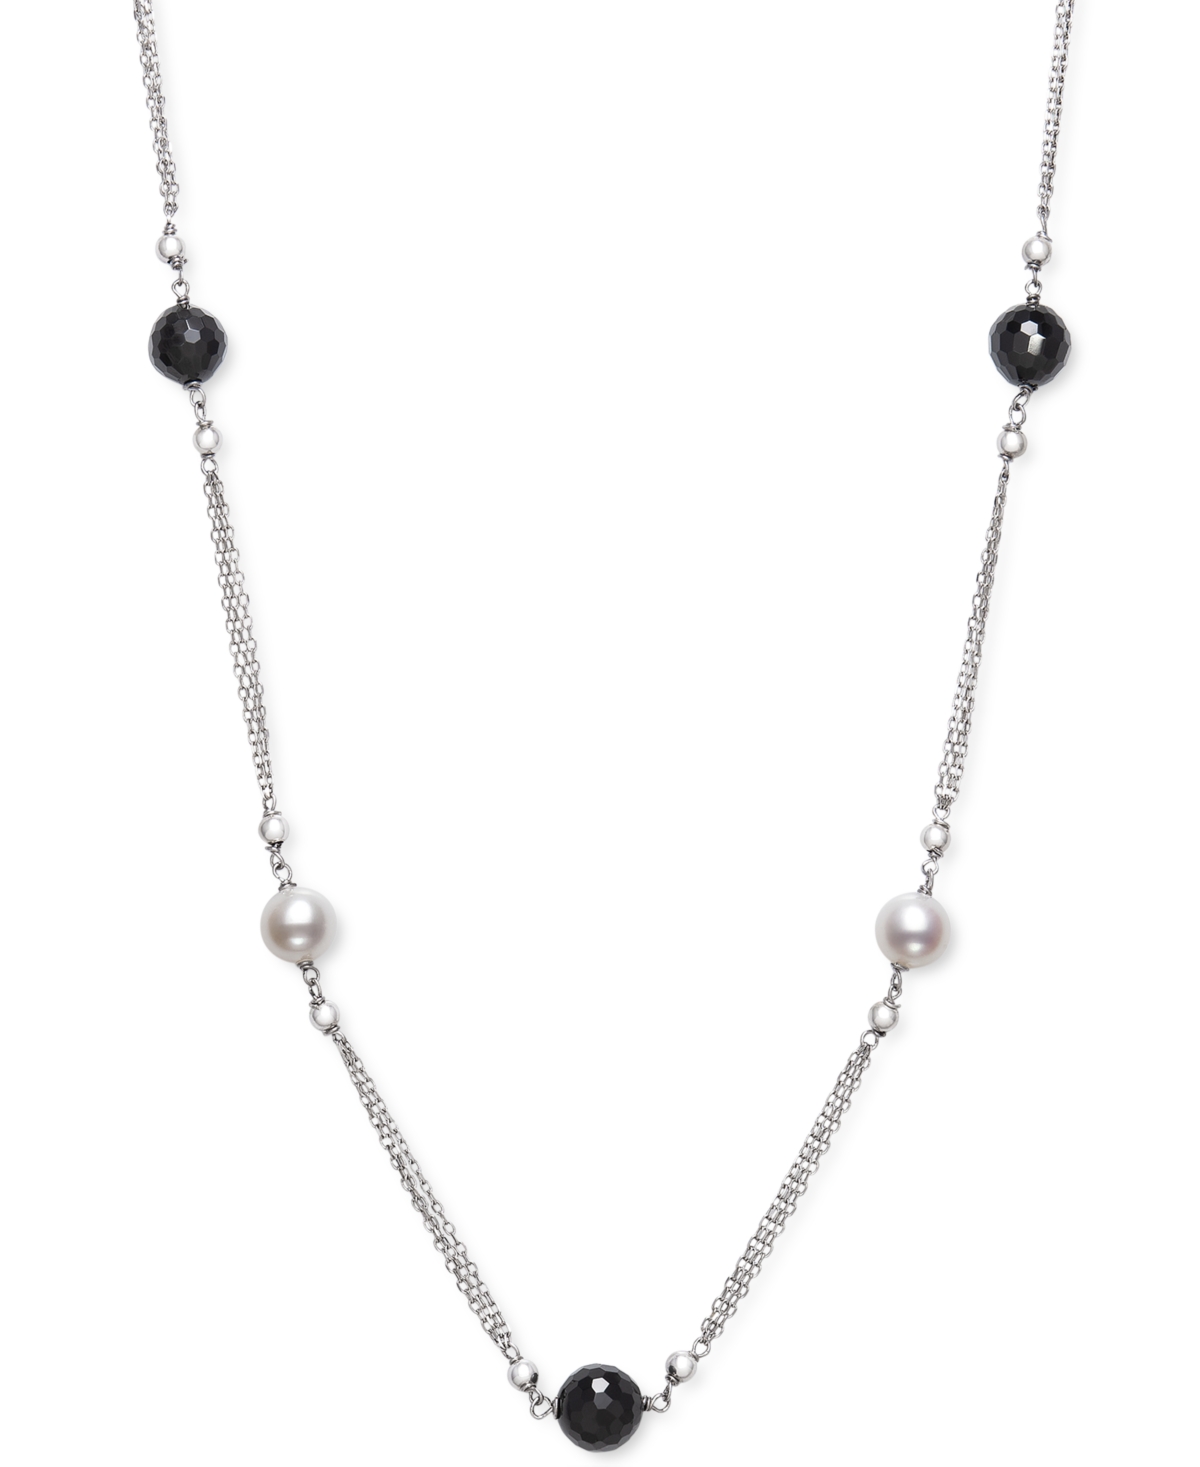 Cultured Freshwater Pearl (7-8mm) & Onyx Bead Statement Necklace in Sterling Silver, 18" + 2" extender, Created for Macy's - Sterling Sil